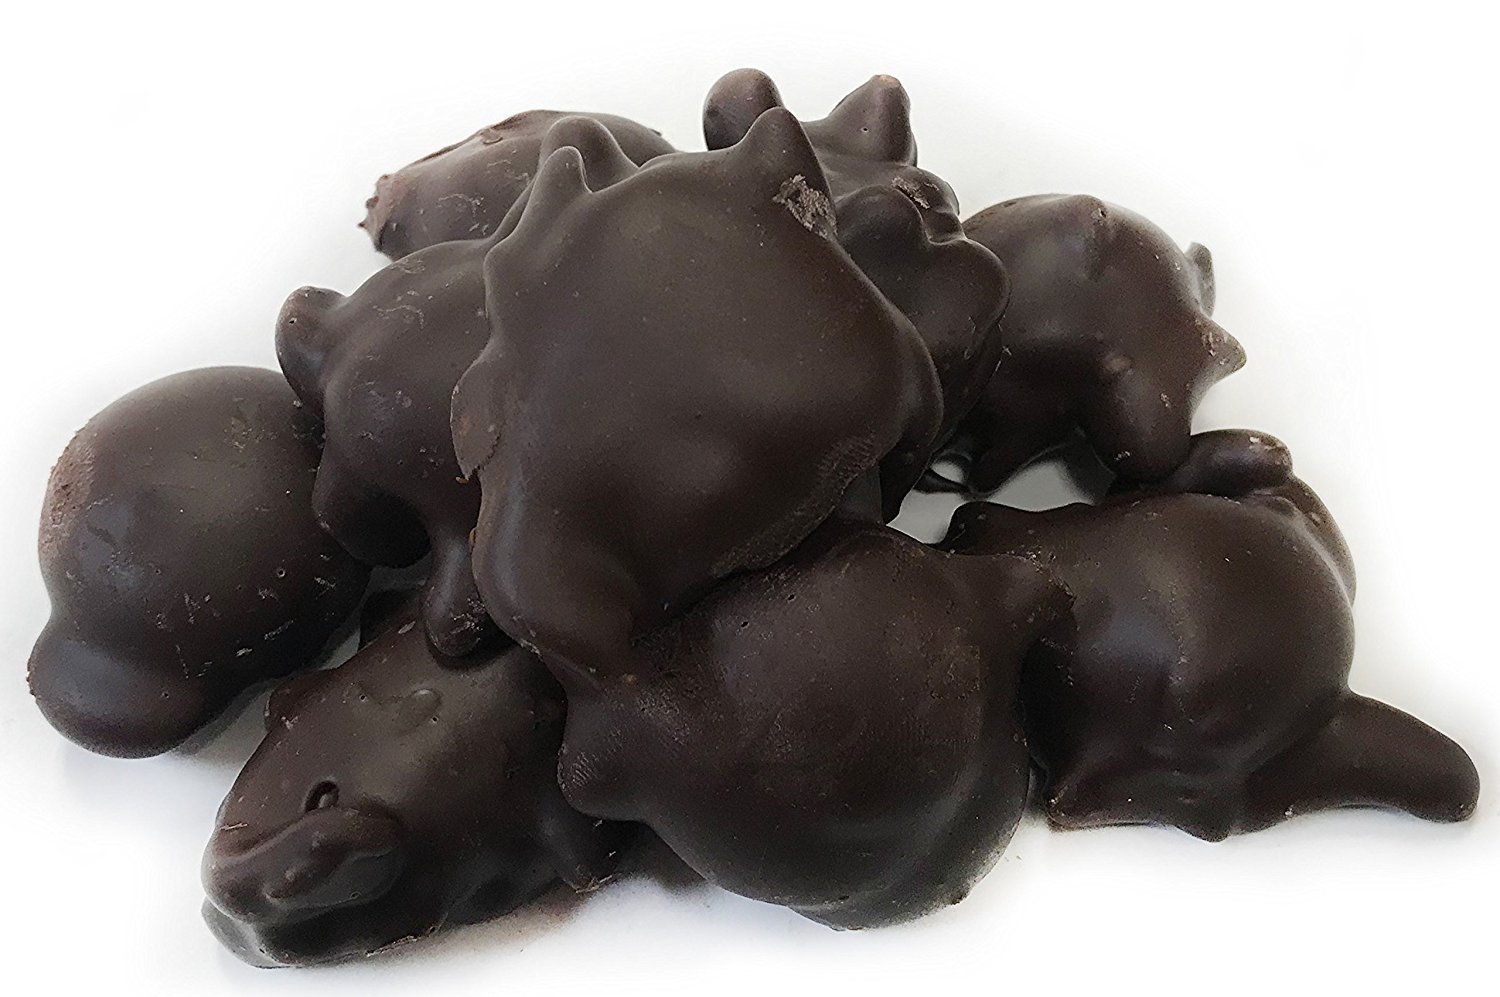 It's Delish Gourmet Cashew Caramel Clusters with Dark Chocolate , 2 lbs